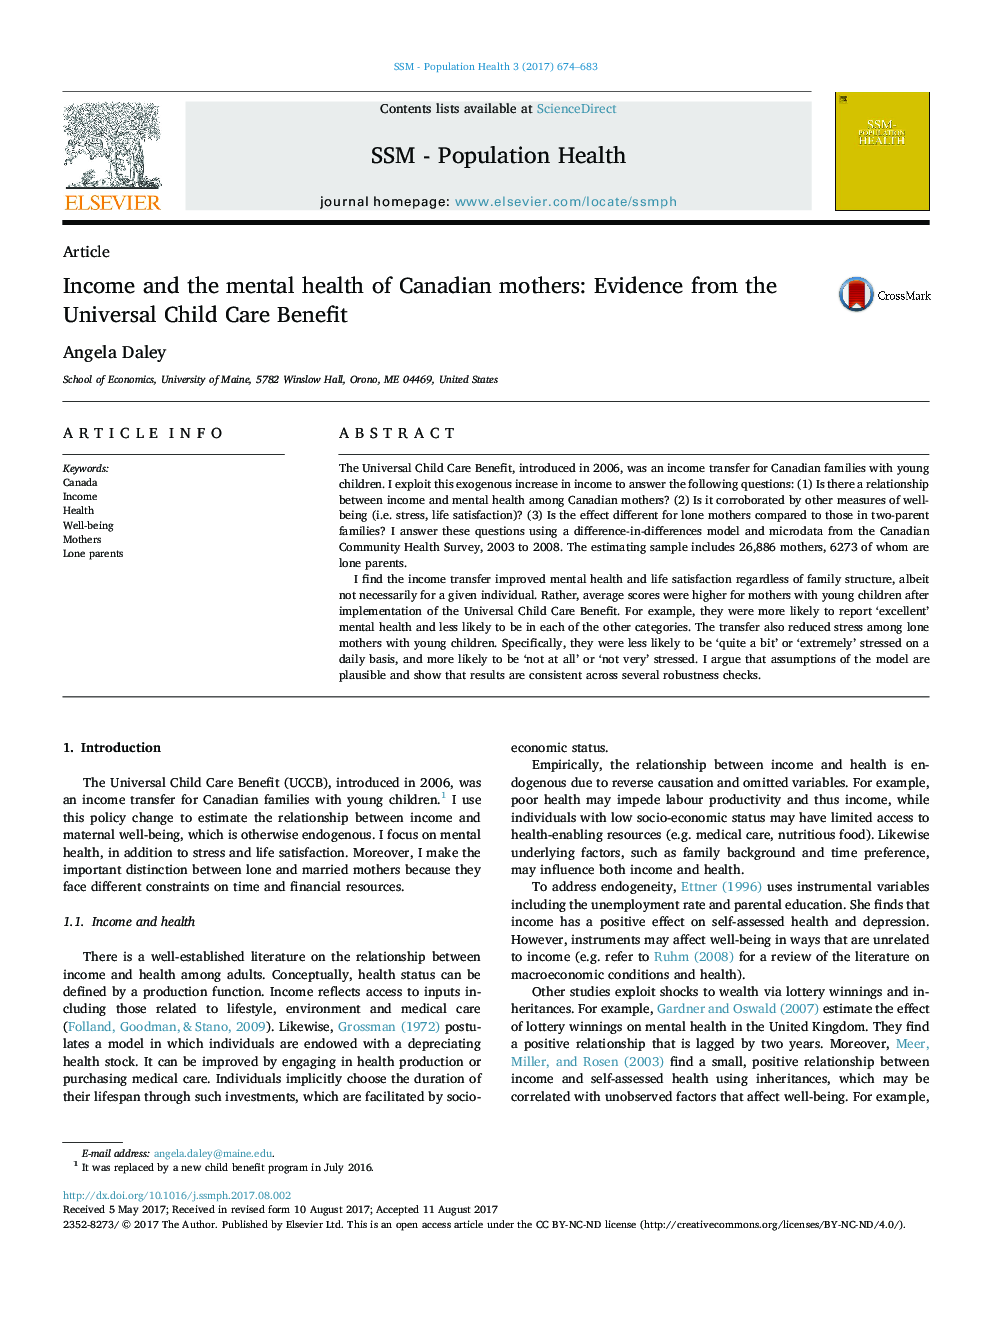 Income and the mental health of Canadian mothers: Evidence from the Universal Child Care Benefit